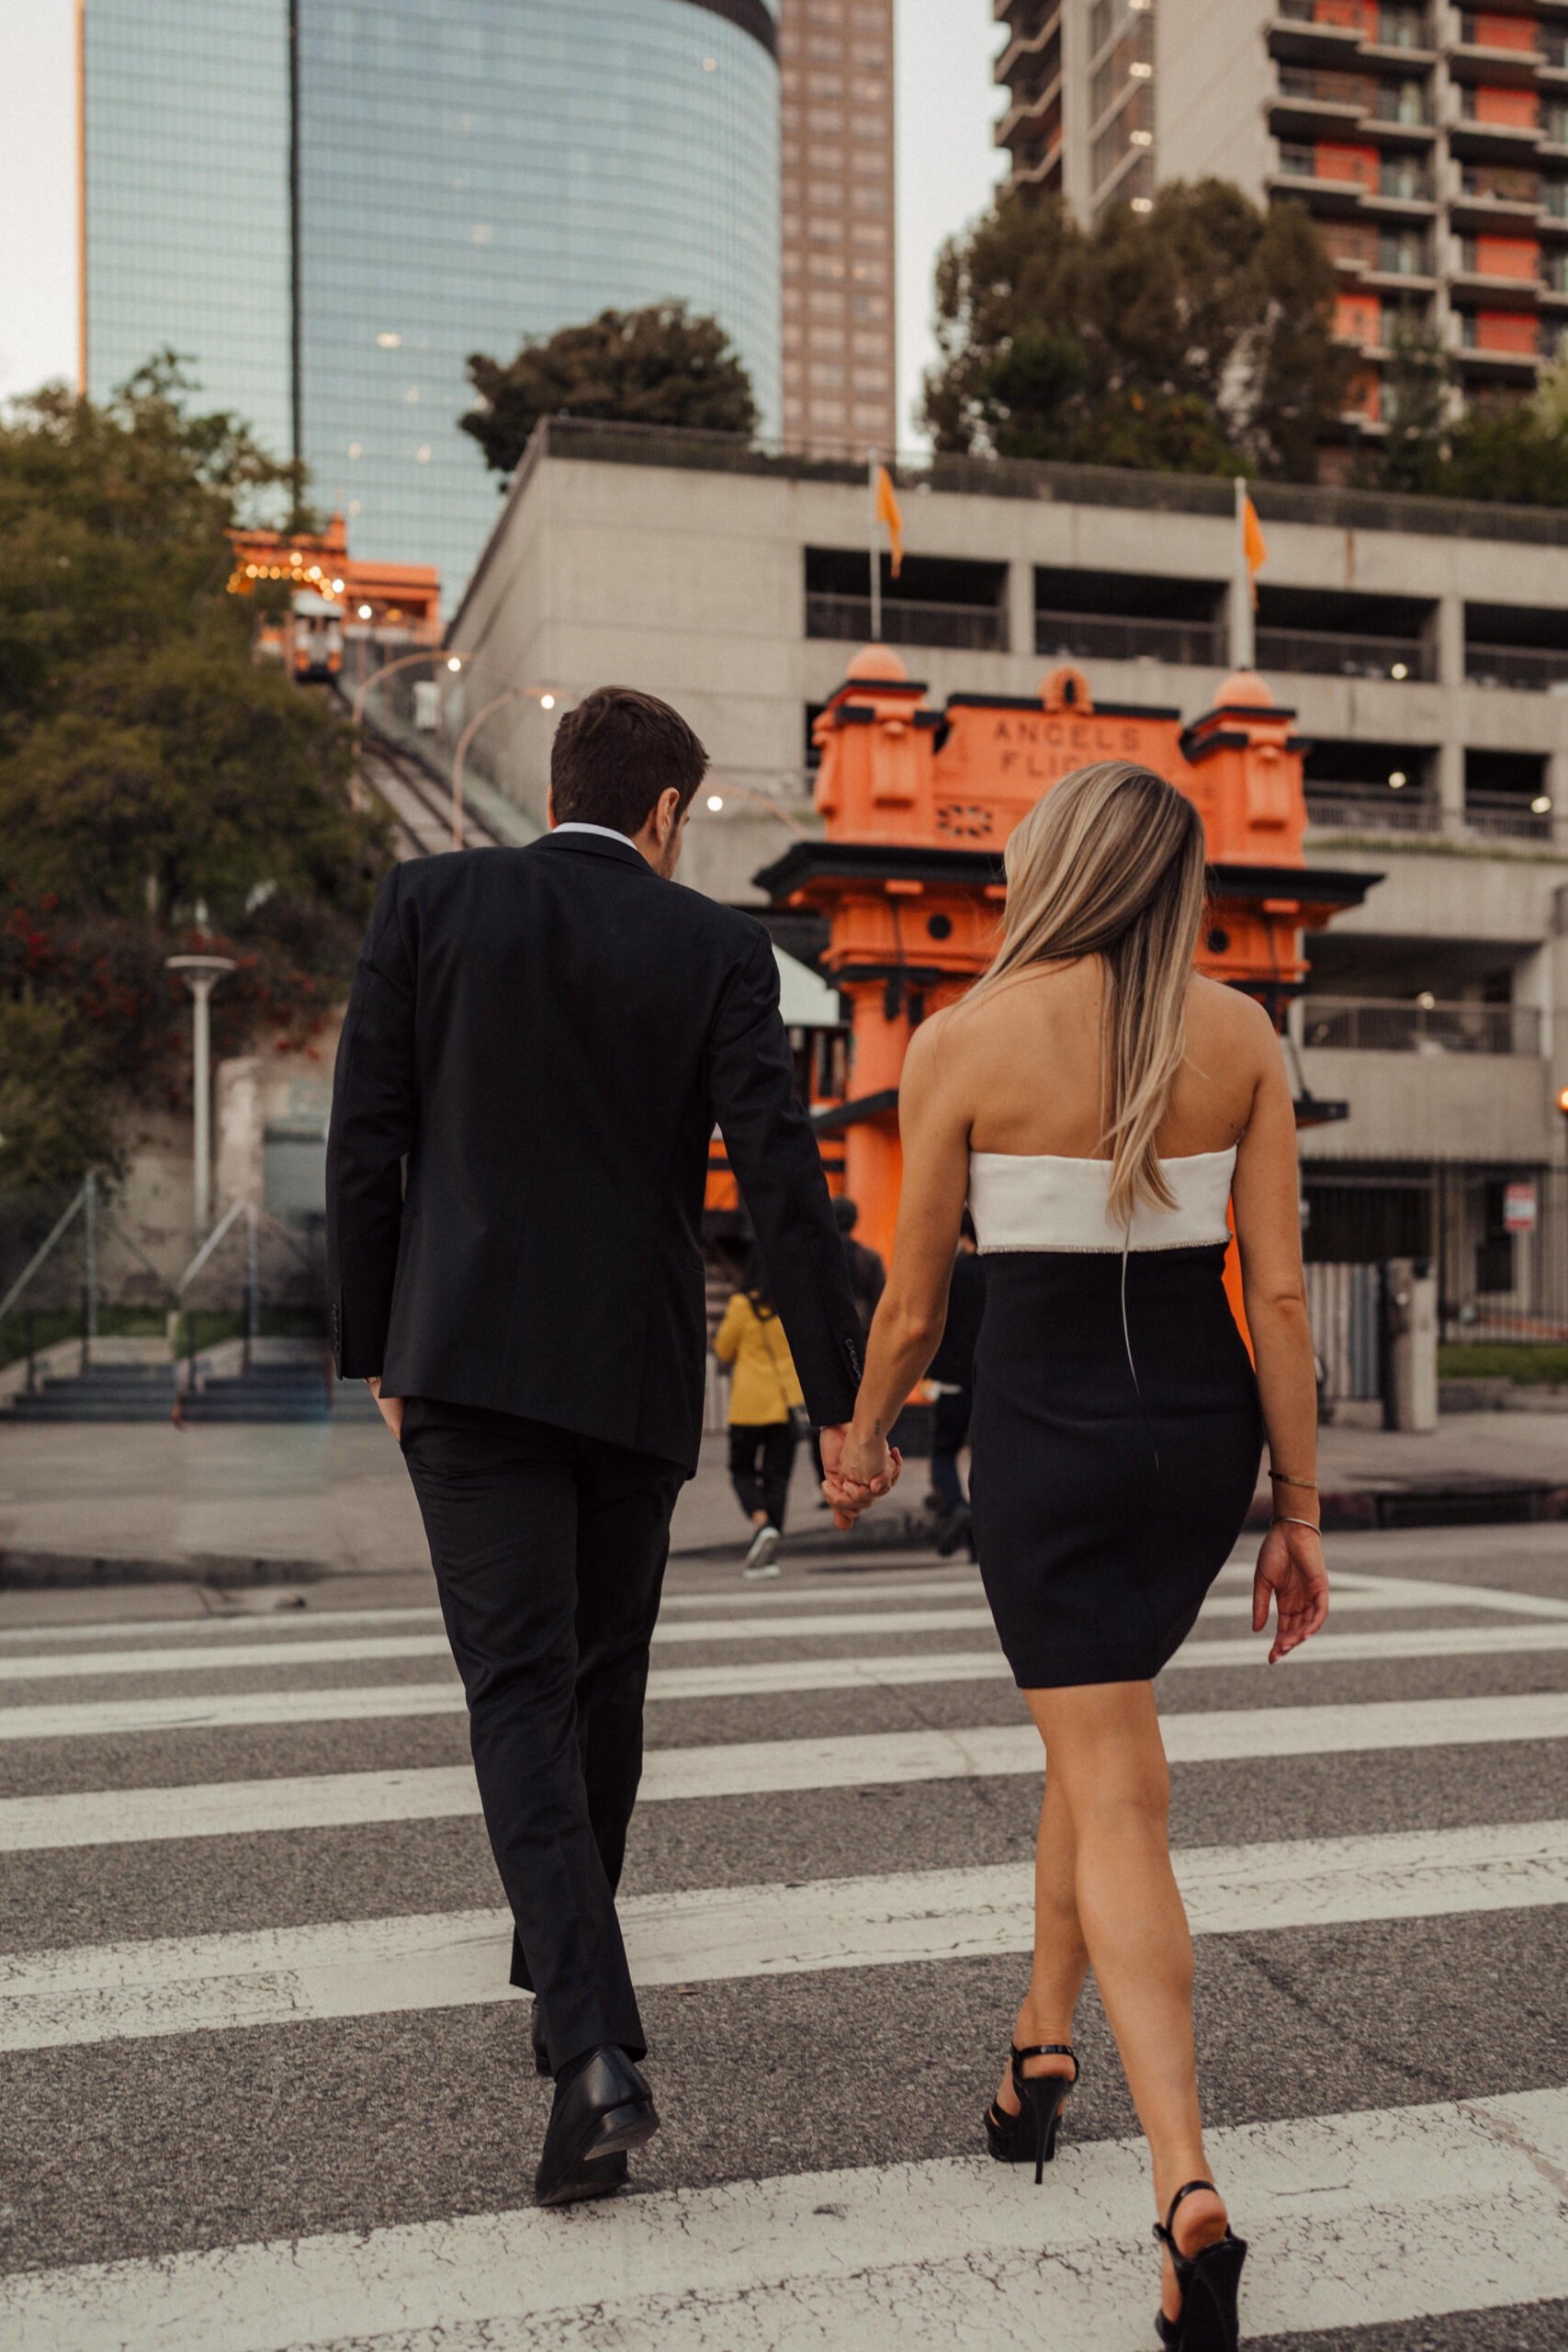 Engaged couple takes engagement photos in front of Angels Flight in Downtown Los Angeles